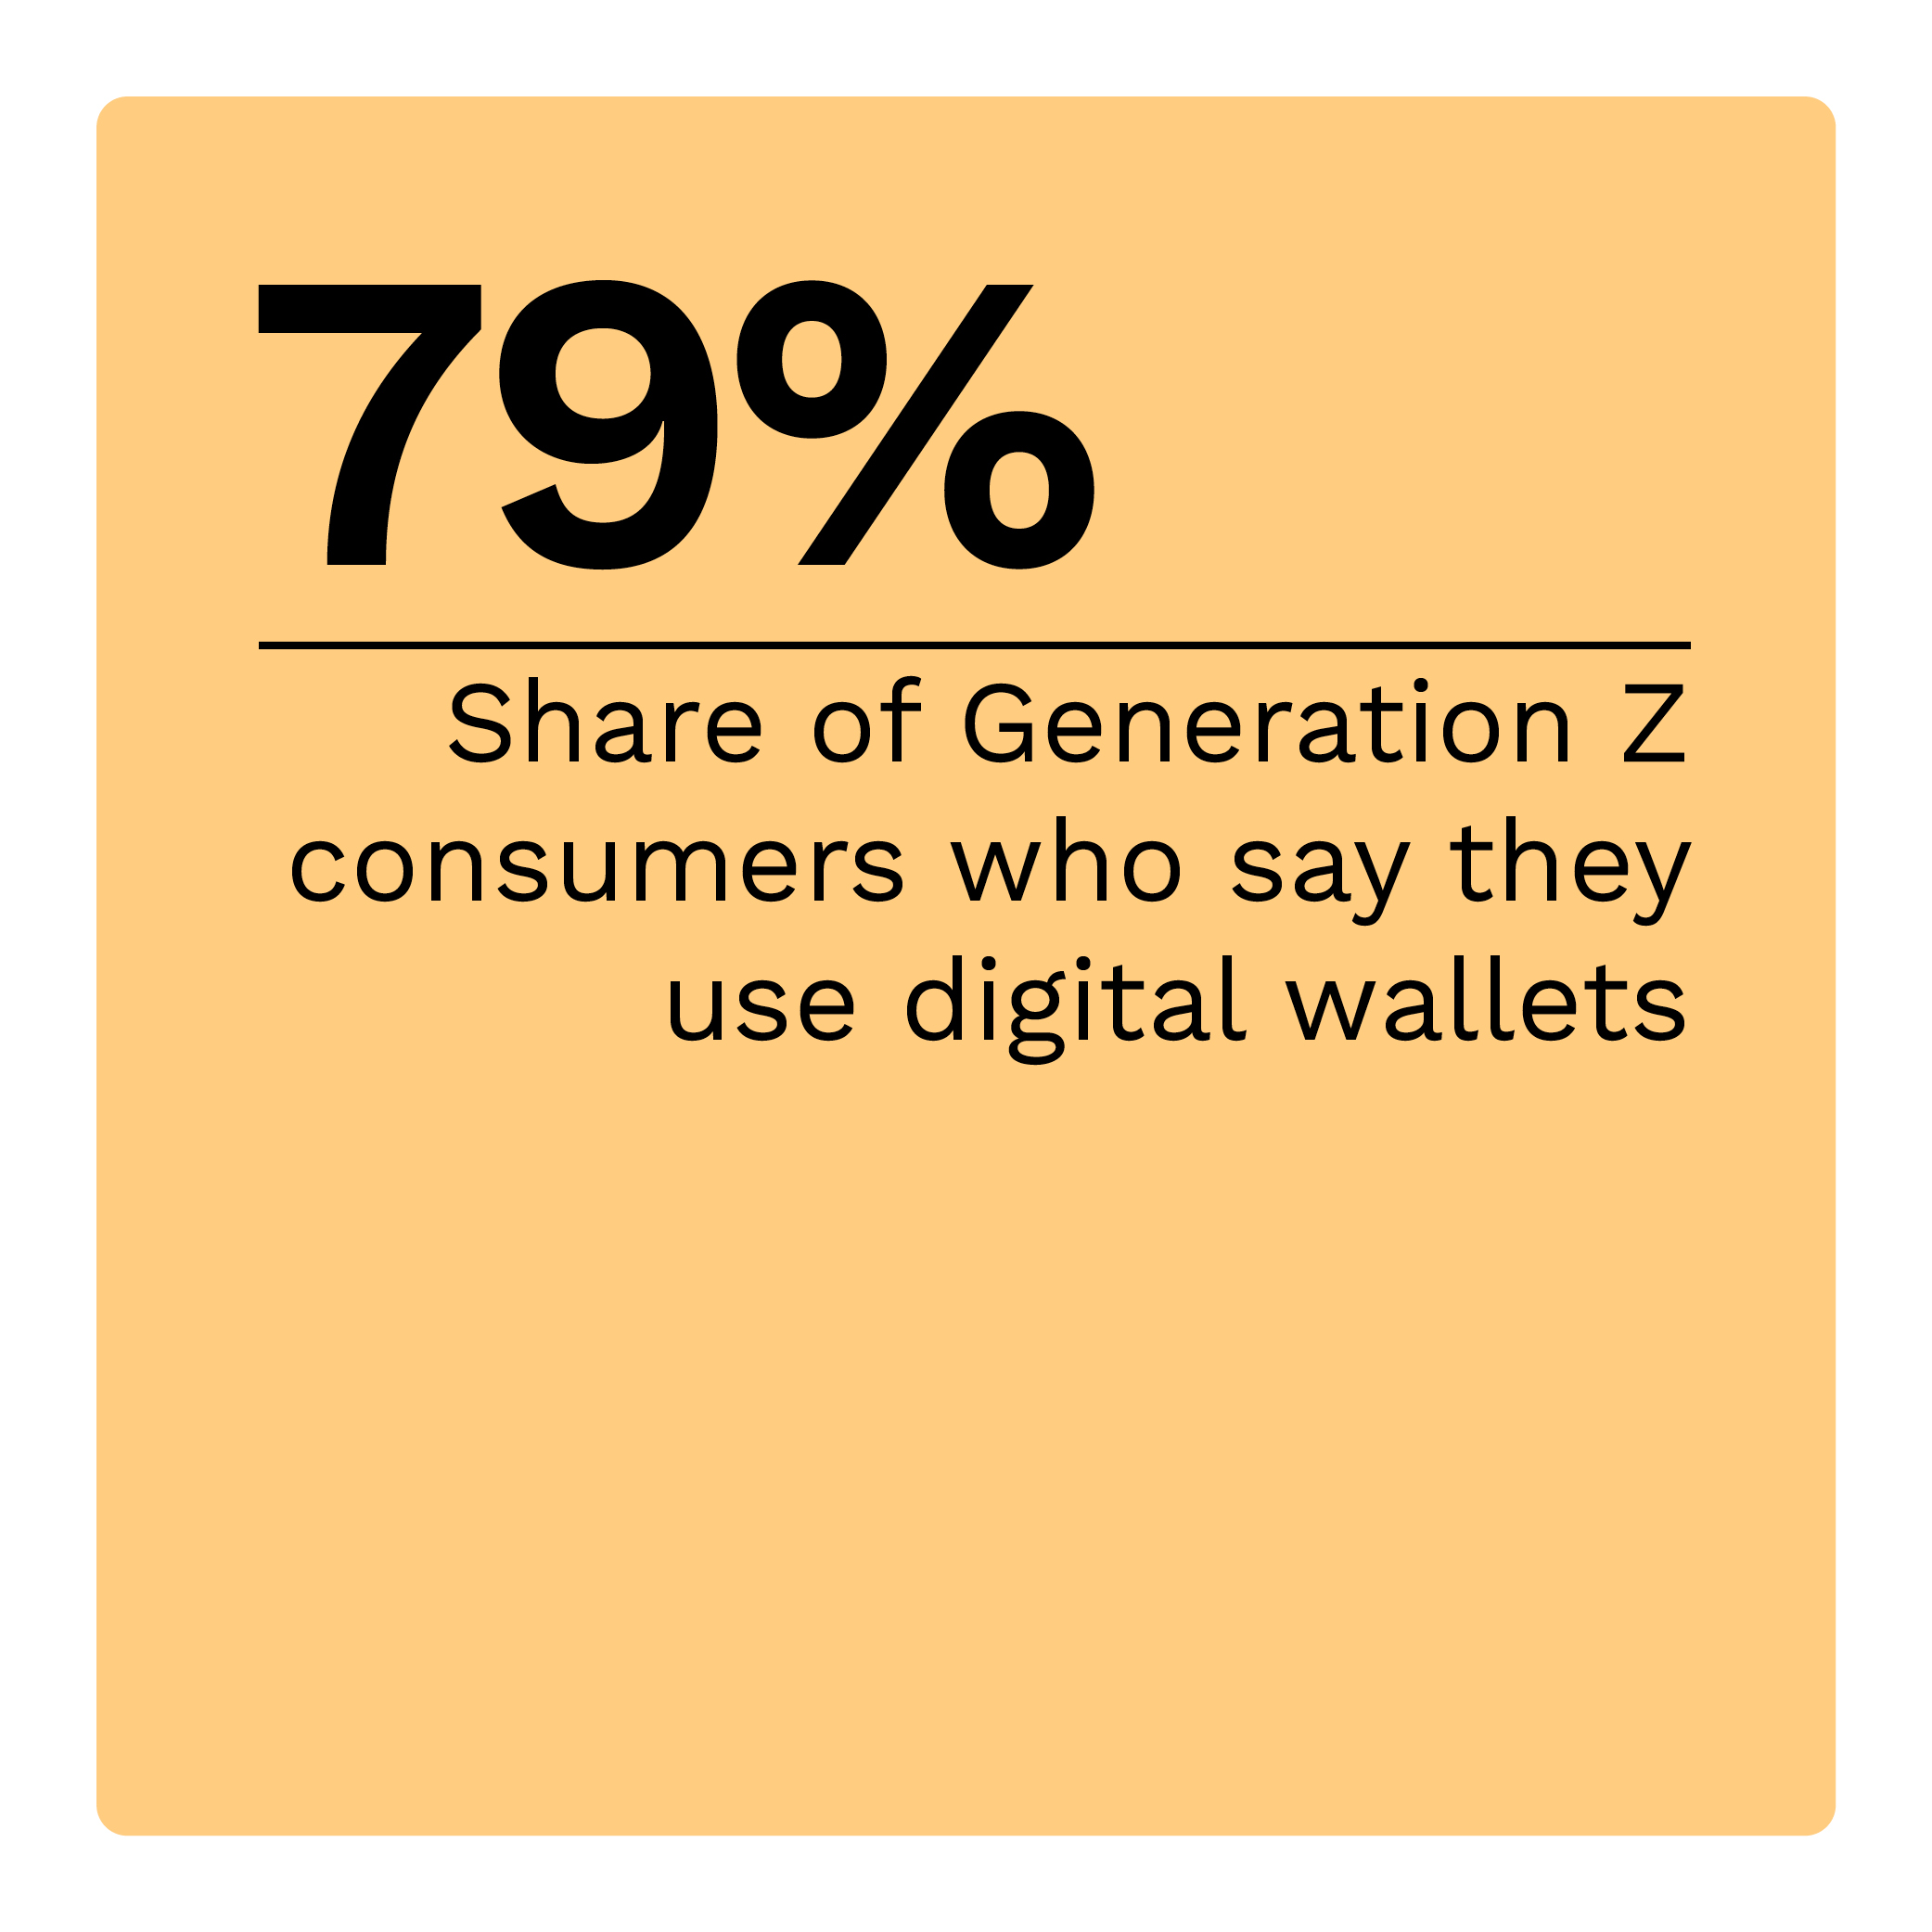 79%: Share of Generation Z consumers who say they use digital wallets